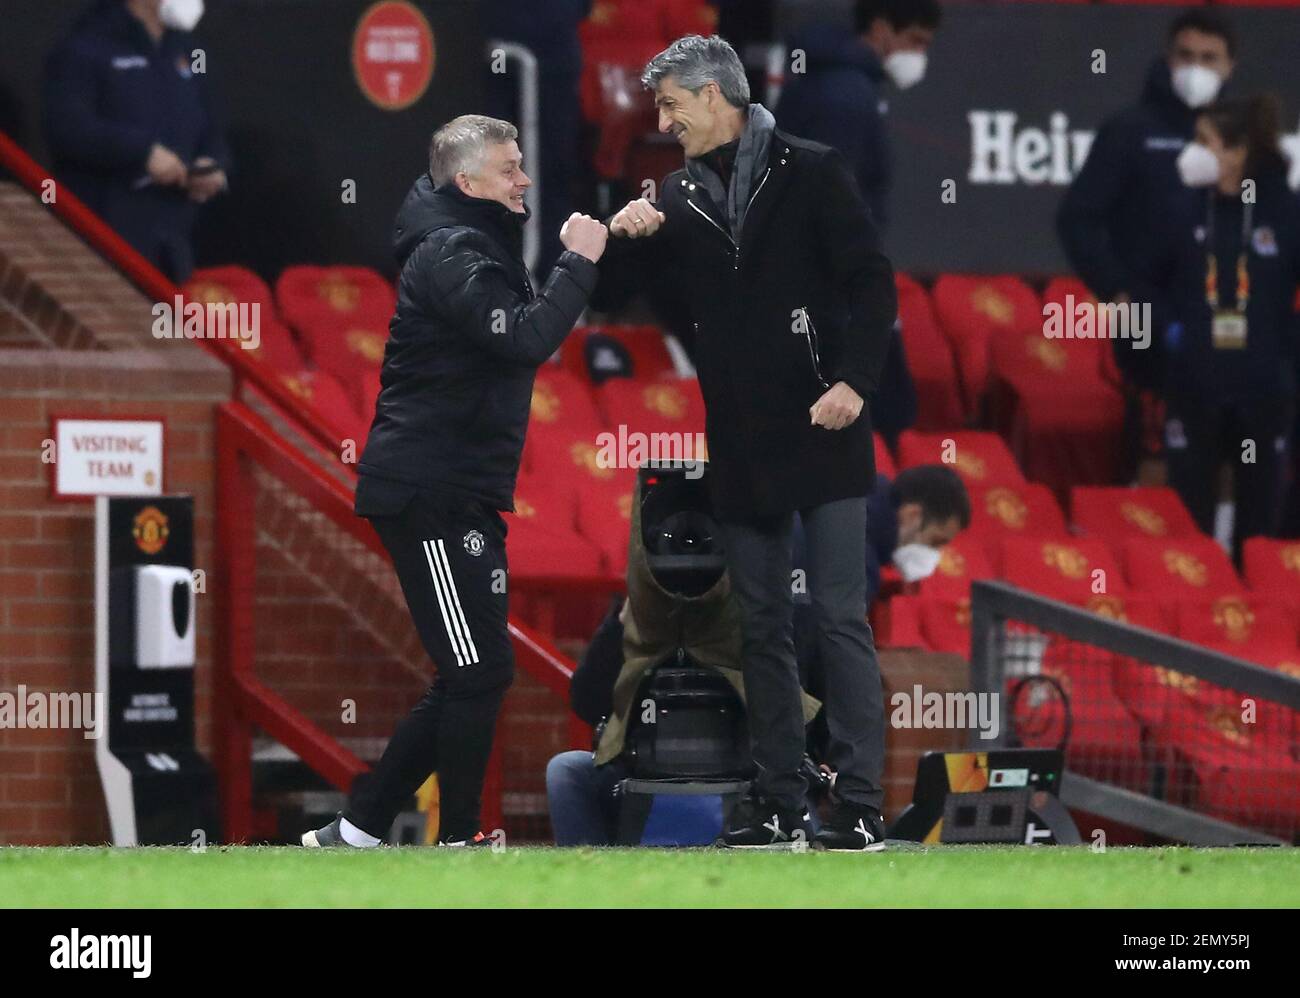 Manchester United manager Ole Gunnar Solskjaer greets Real Sociedad manager Imanol Alguacil after the final whistle during the UEFA Europa League match at Old Trafford, Manchester. Picture date: Thursday February 25, 2021. Stock Photo